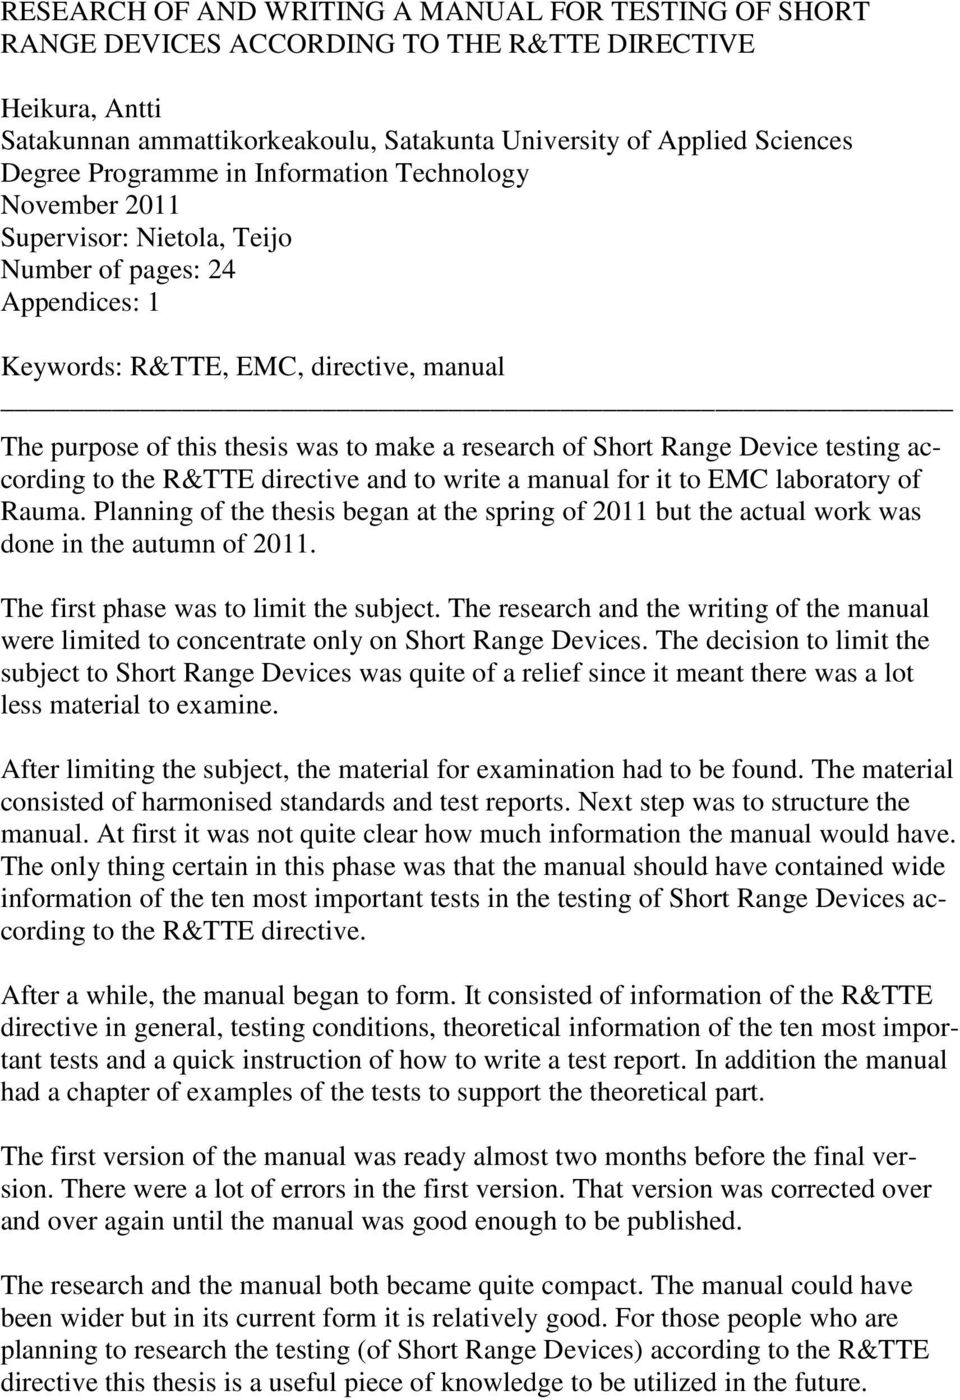 research of Short Range Device testing according to the R&TTE directive and to write a manual for it to EMC laboratory of Rauma.